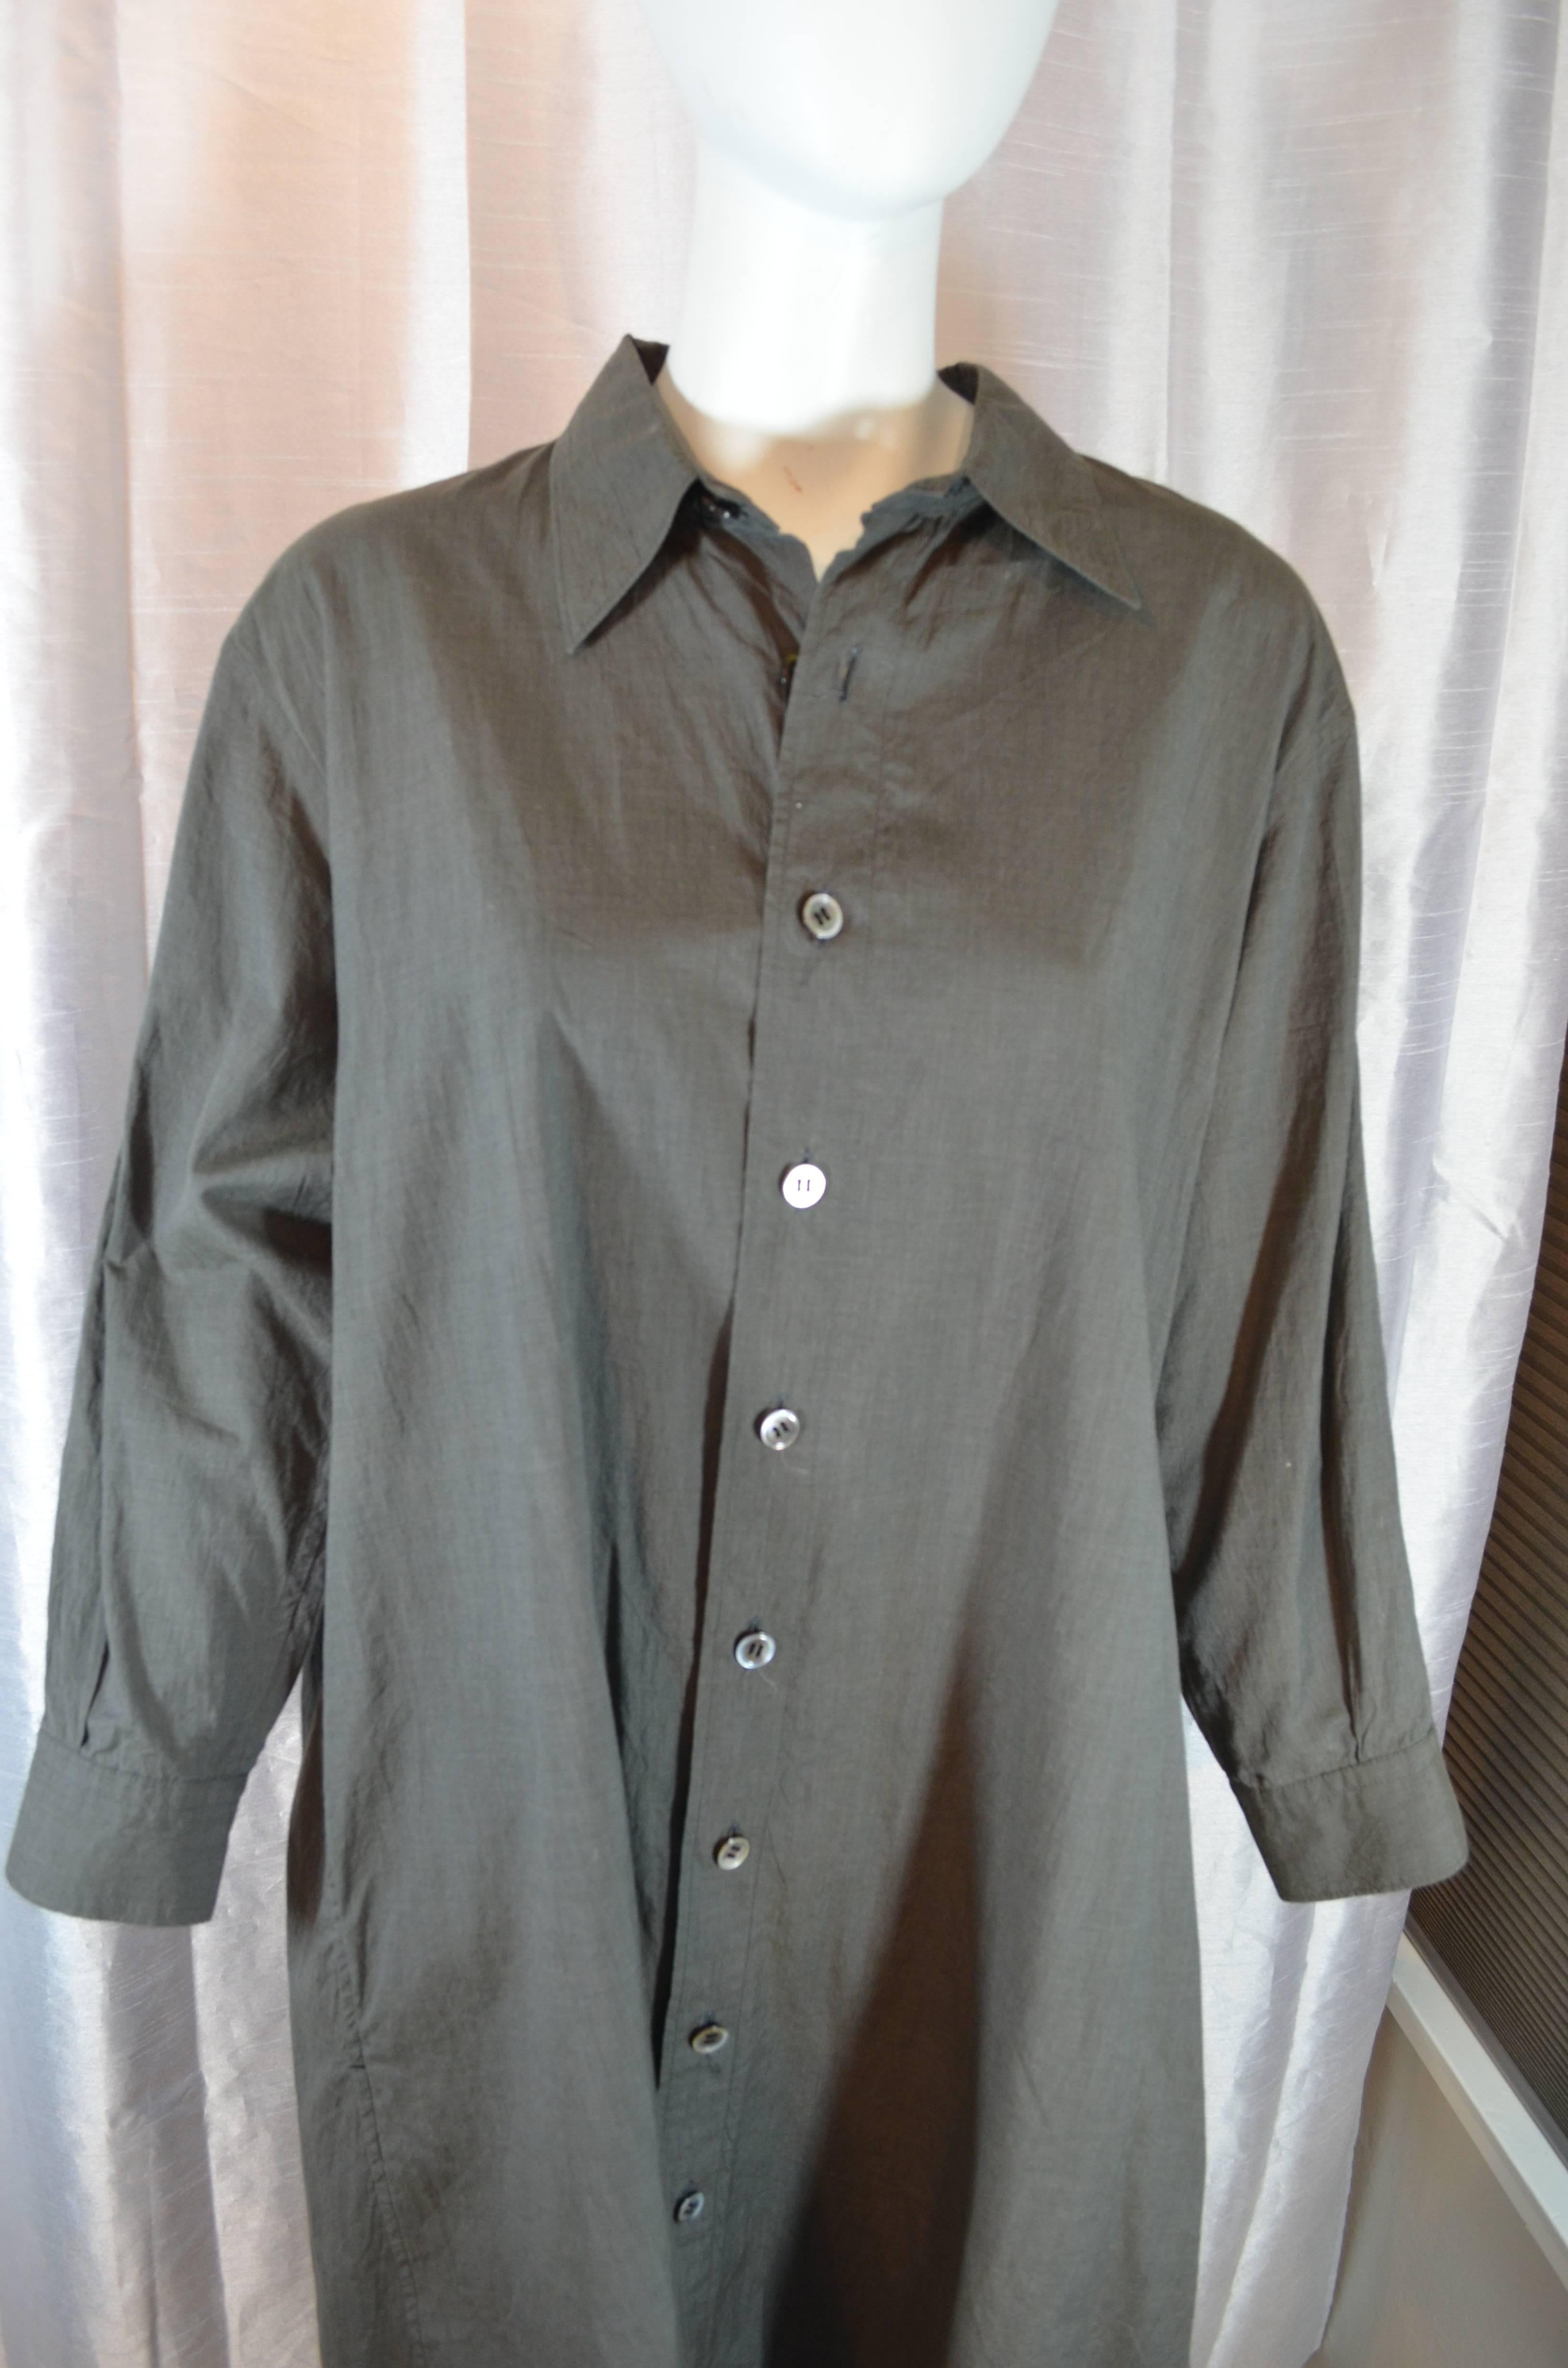 Yohji Yamamoto Y's A-line Shirt Dress in 100% cotton. Front buttons, mens shirt hemline, longer in the back than front. Side seam pockets. Back pleat. Good pre-worn condition. Size 4 / on a 1-4 scale.

Measurements in inches:
Shoulder - 19
Bust -